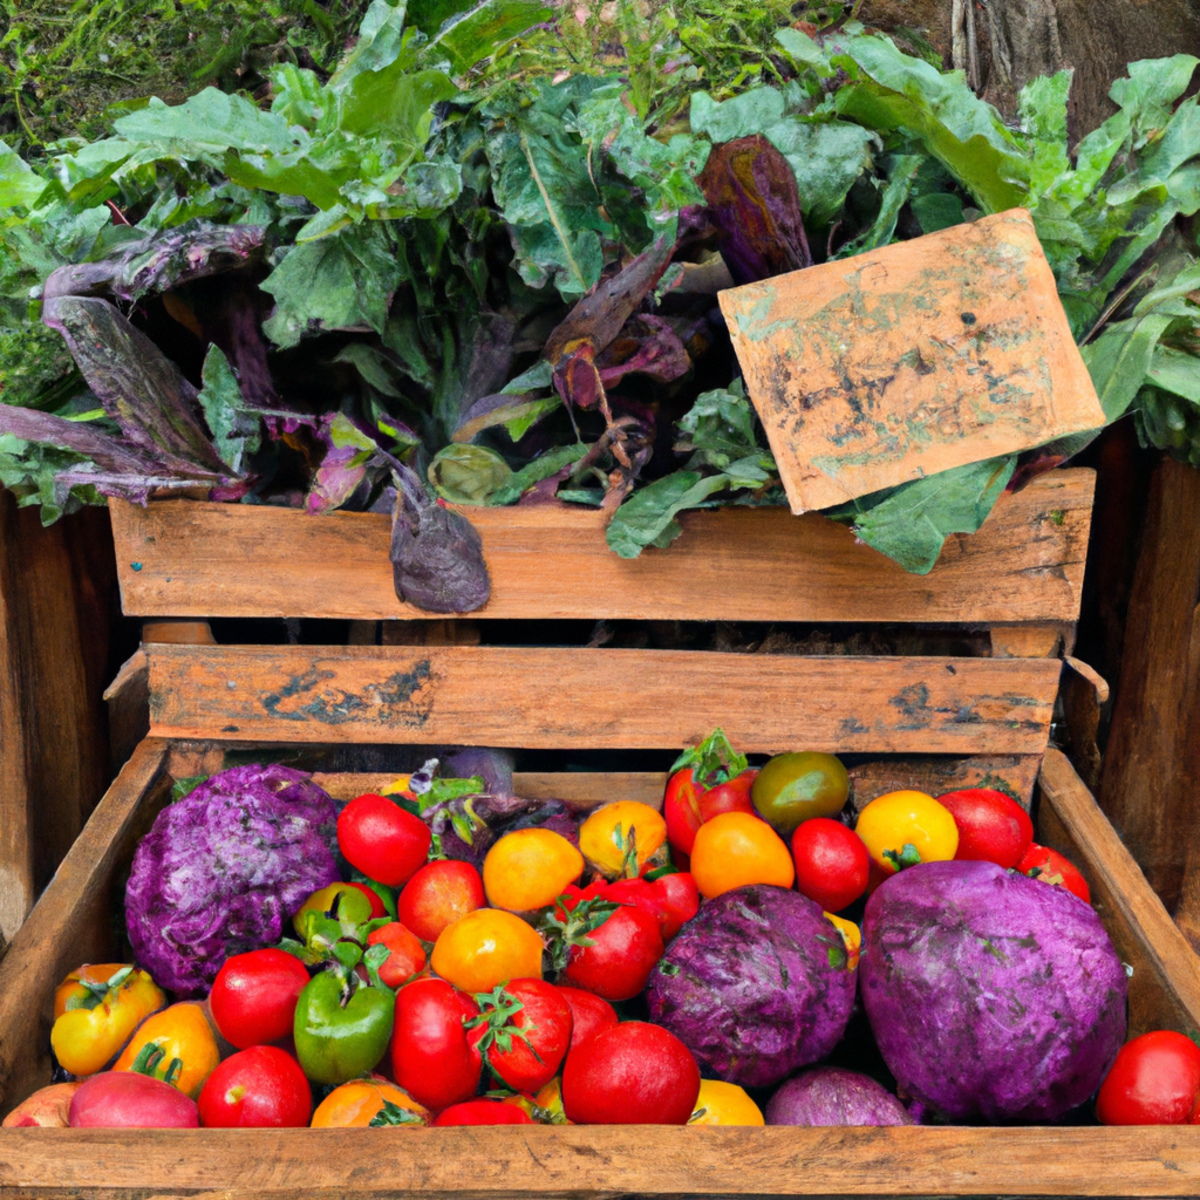 The photo captures a colorful array of organic fruits and vegetables arranged in a rustic wooden crate. The vibrant hues of the produce, including deep purple eggplants, bright red tomatoes, and leafy green kale, are a testament to the natural beauty and diversity of organic farming. A small sign next to the crate proudly proclaims the farm's commitment to sustainable and pesticide-free practices. In the background, a farmer can be seen tending to rows of crops, further emphasizing the human connection and care that goes into producing organic foods. The photo serves as a visual reminder of the growing movement towards healthier and more environmentally conscious food choices.